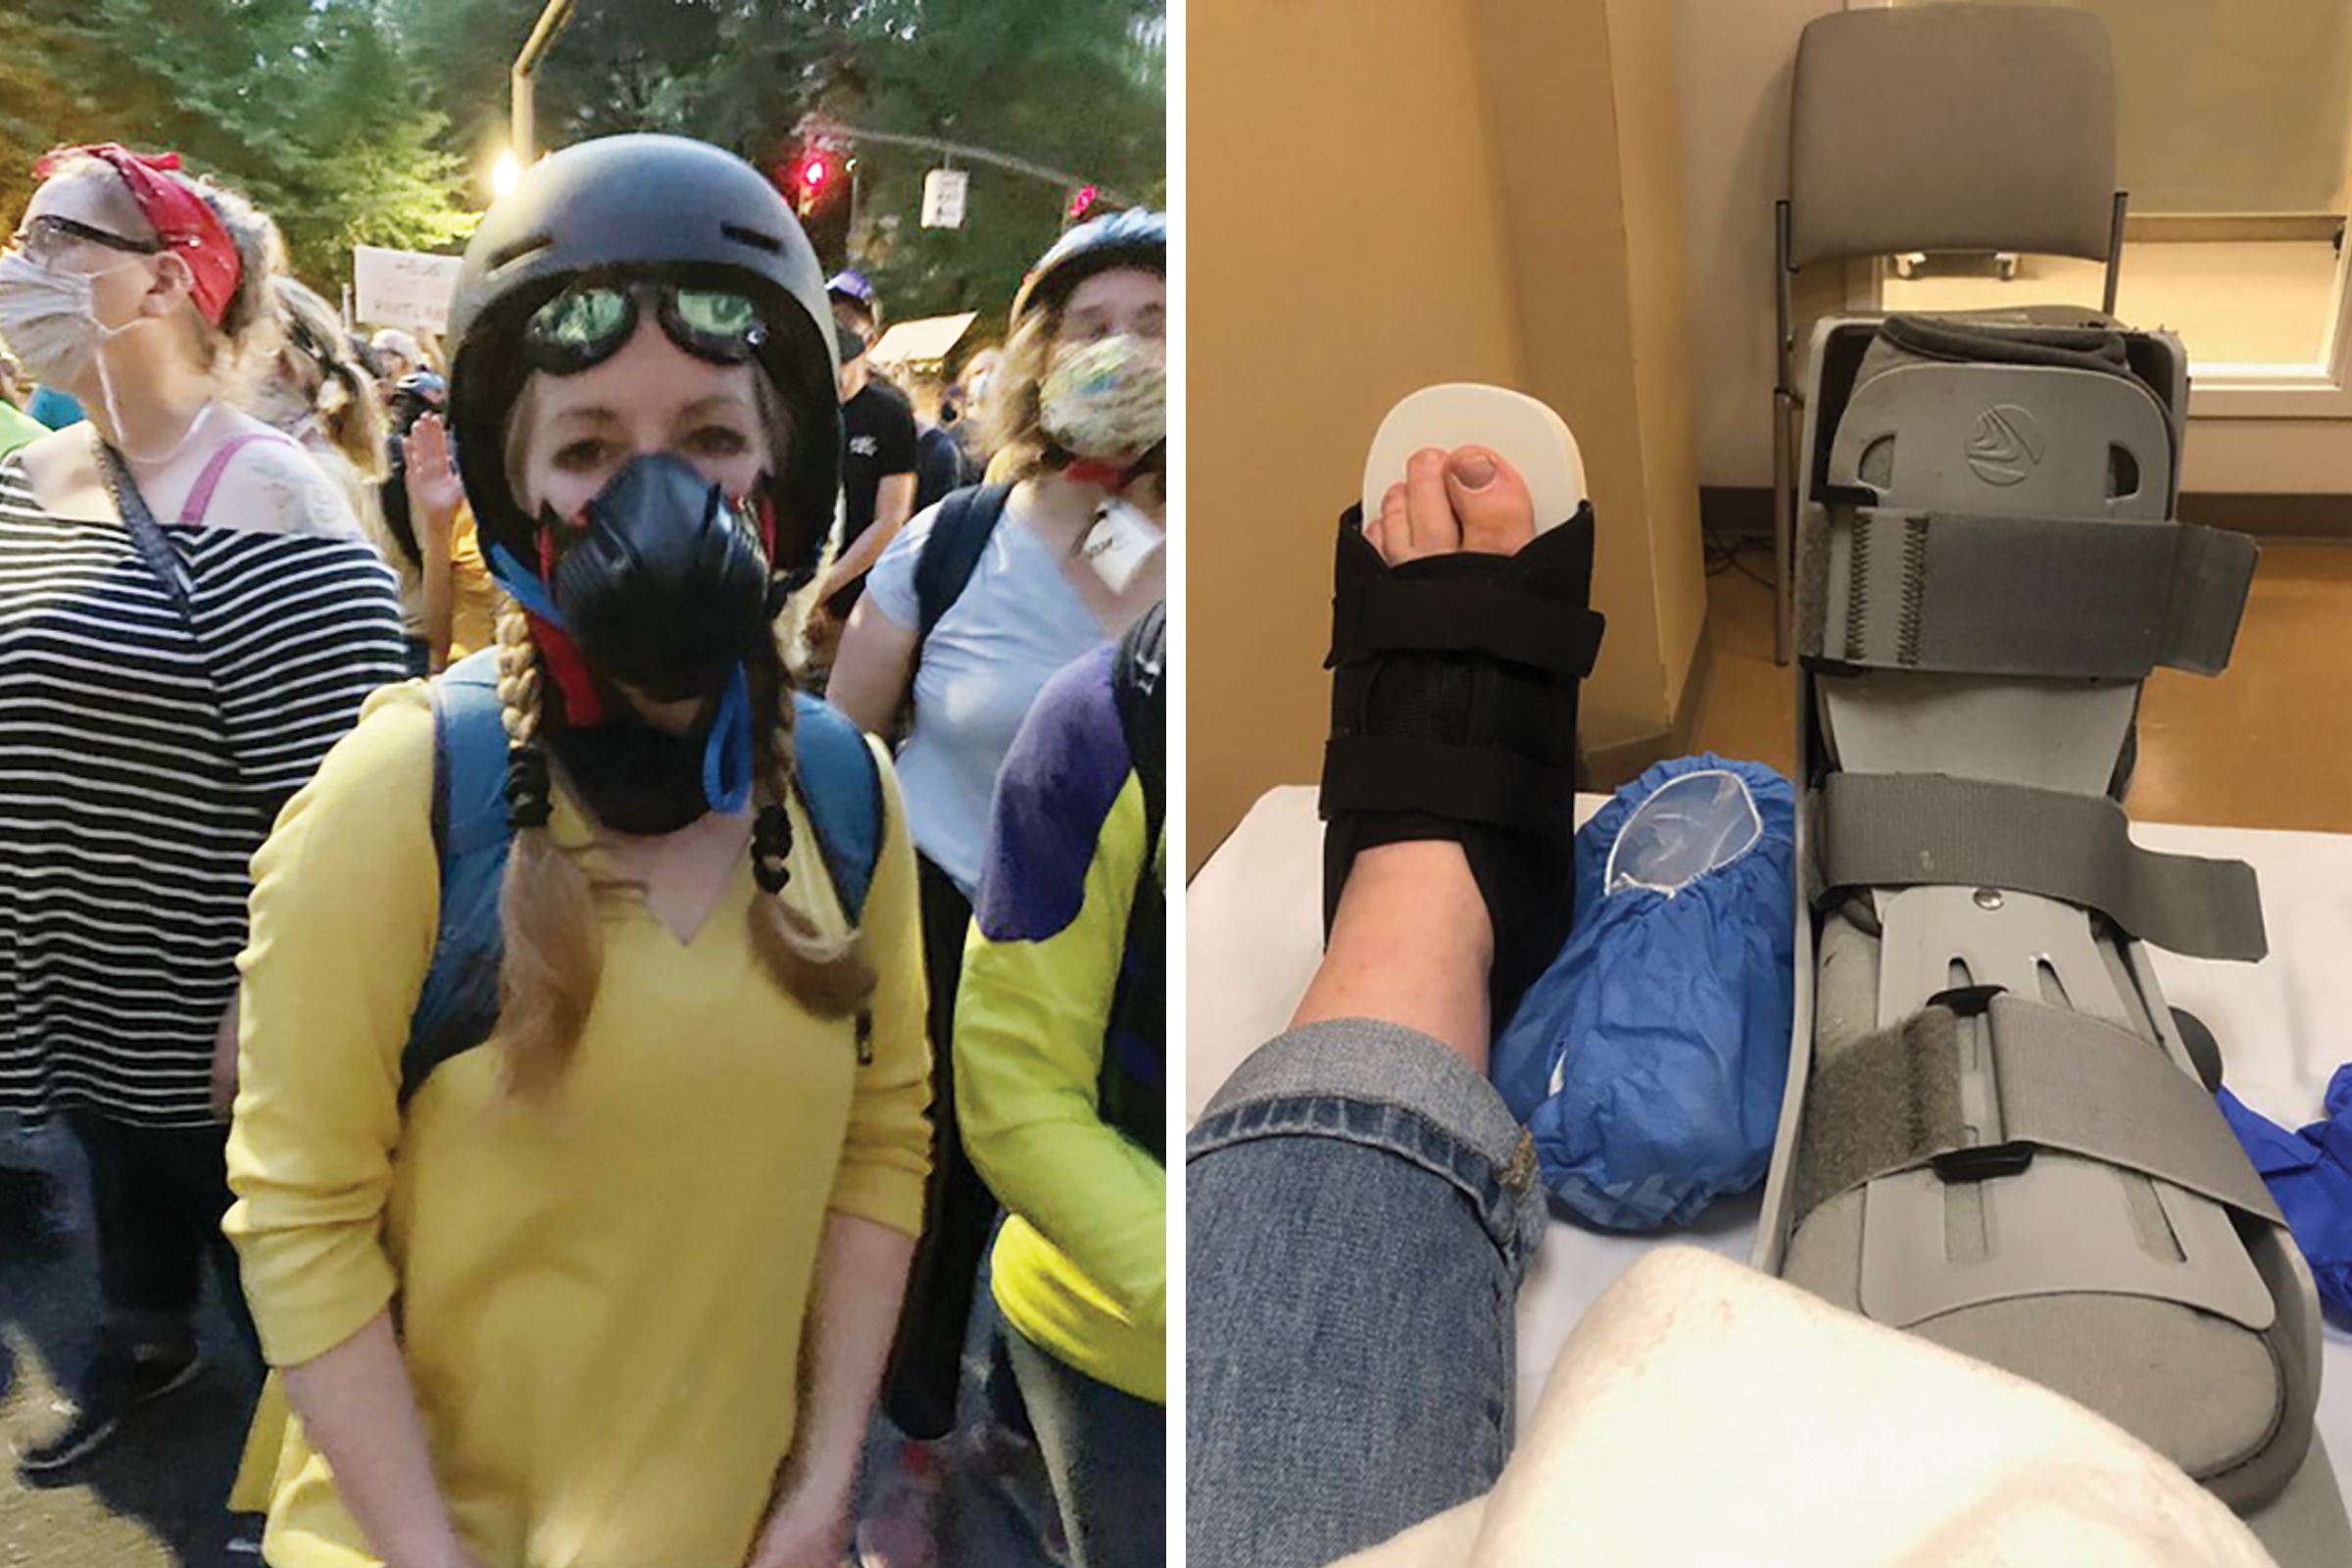 Ellen Urbani was hit in the foot by what she believes was a rubber bullet at a protest in Portland, Ore., on July 24. (Courtesy Joan Henderson-Gaither/Ellen Urbani (2))